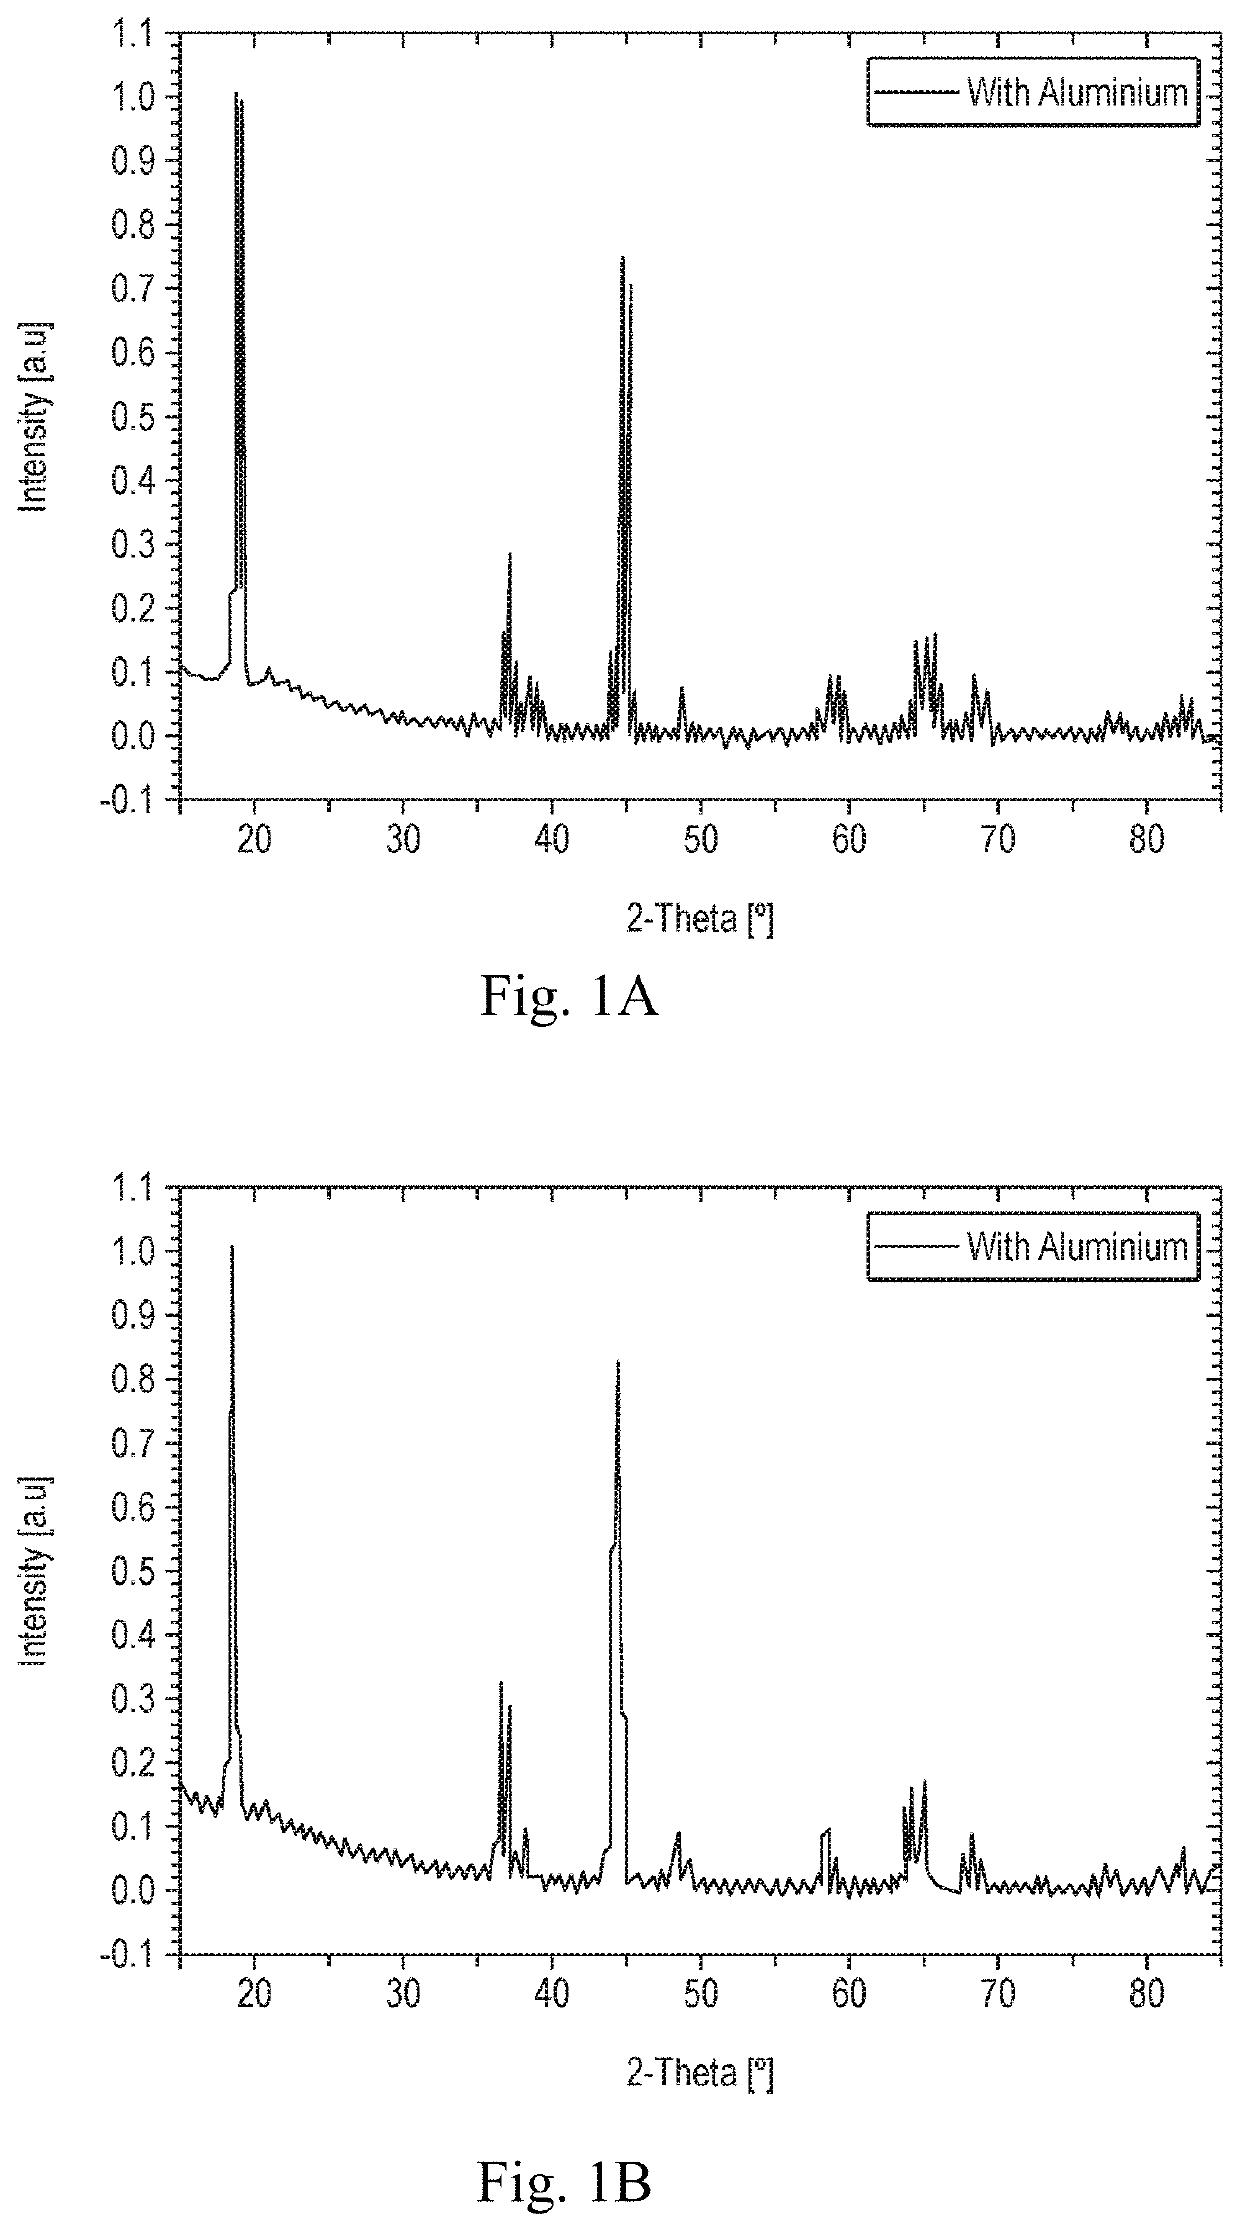 Use of aluminum in a lithium rich cathode material for suppressing gas evolution from the cathode material during a charge cycle and for increasing the charge capacity of the cathode material